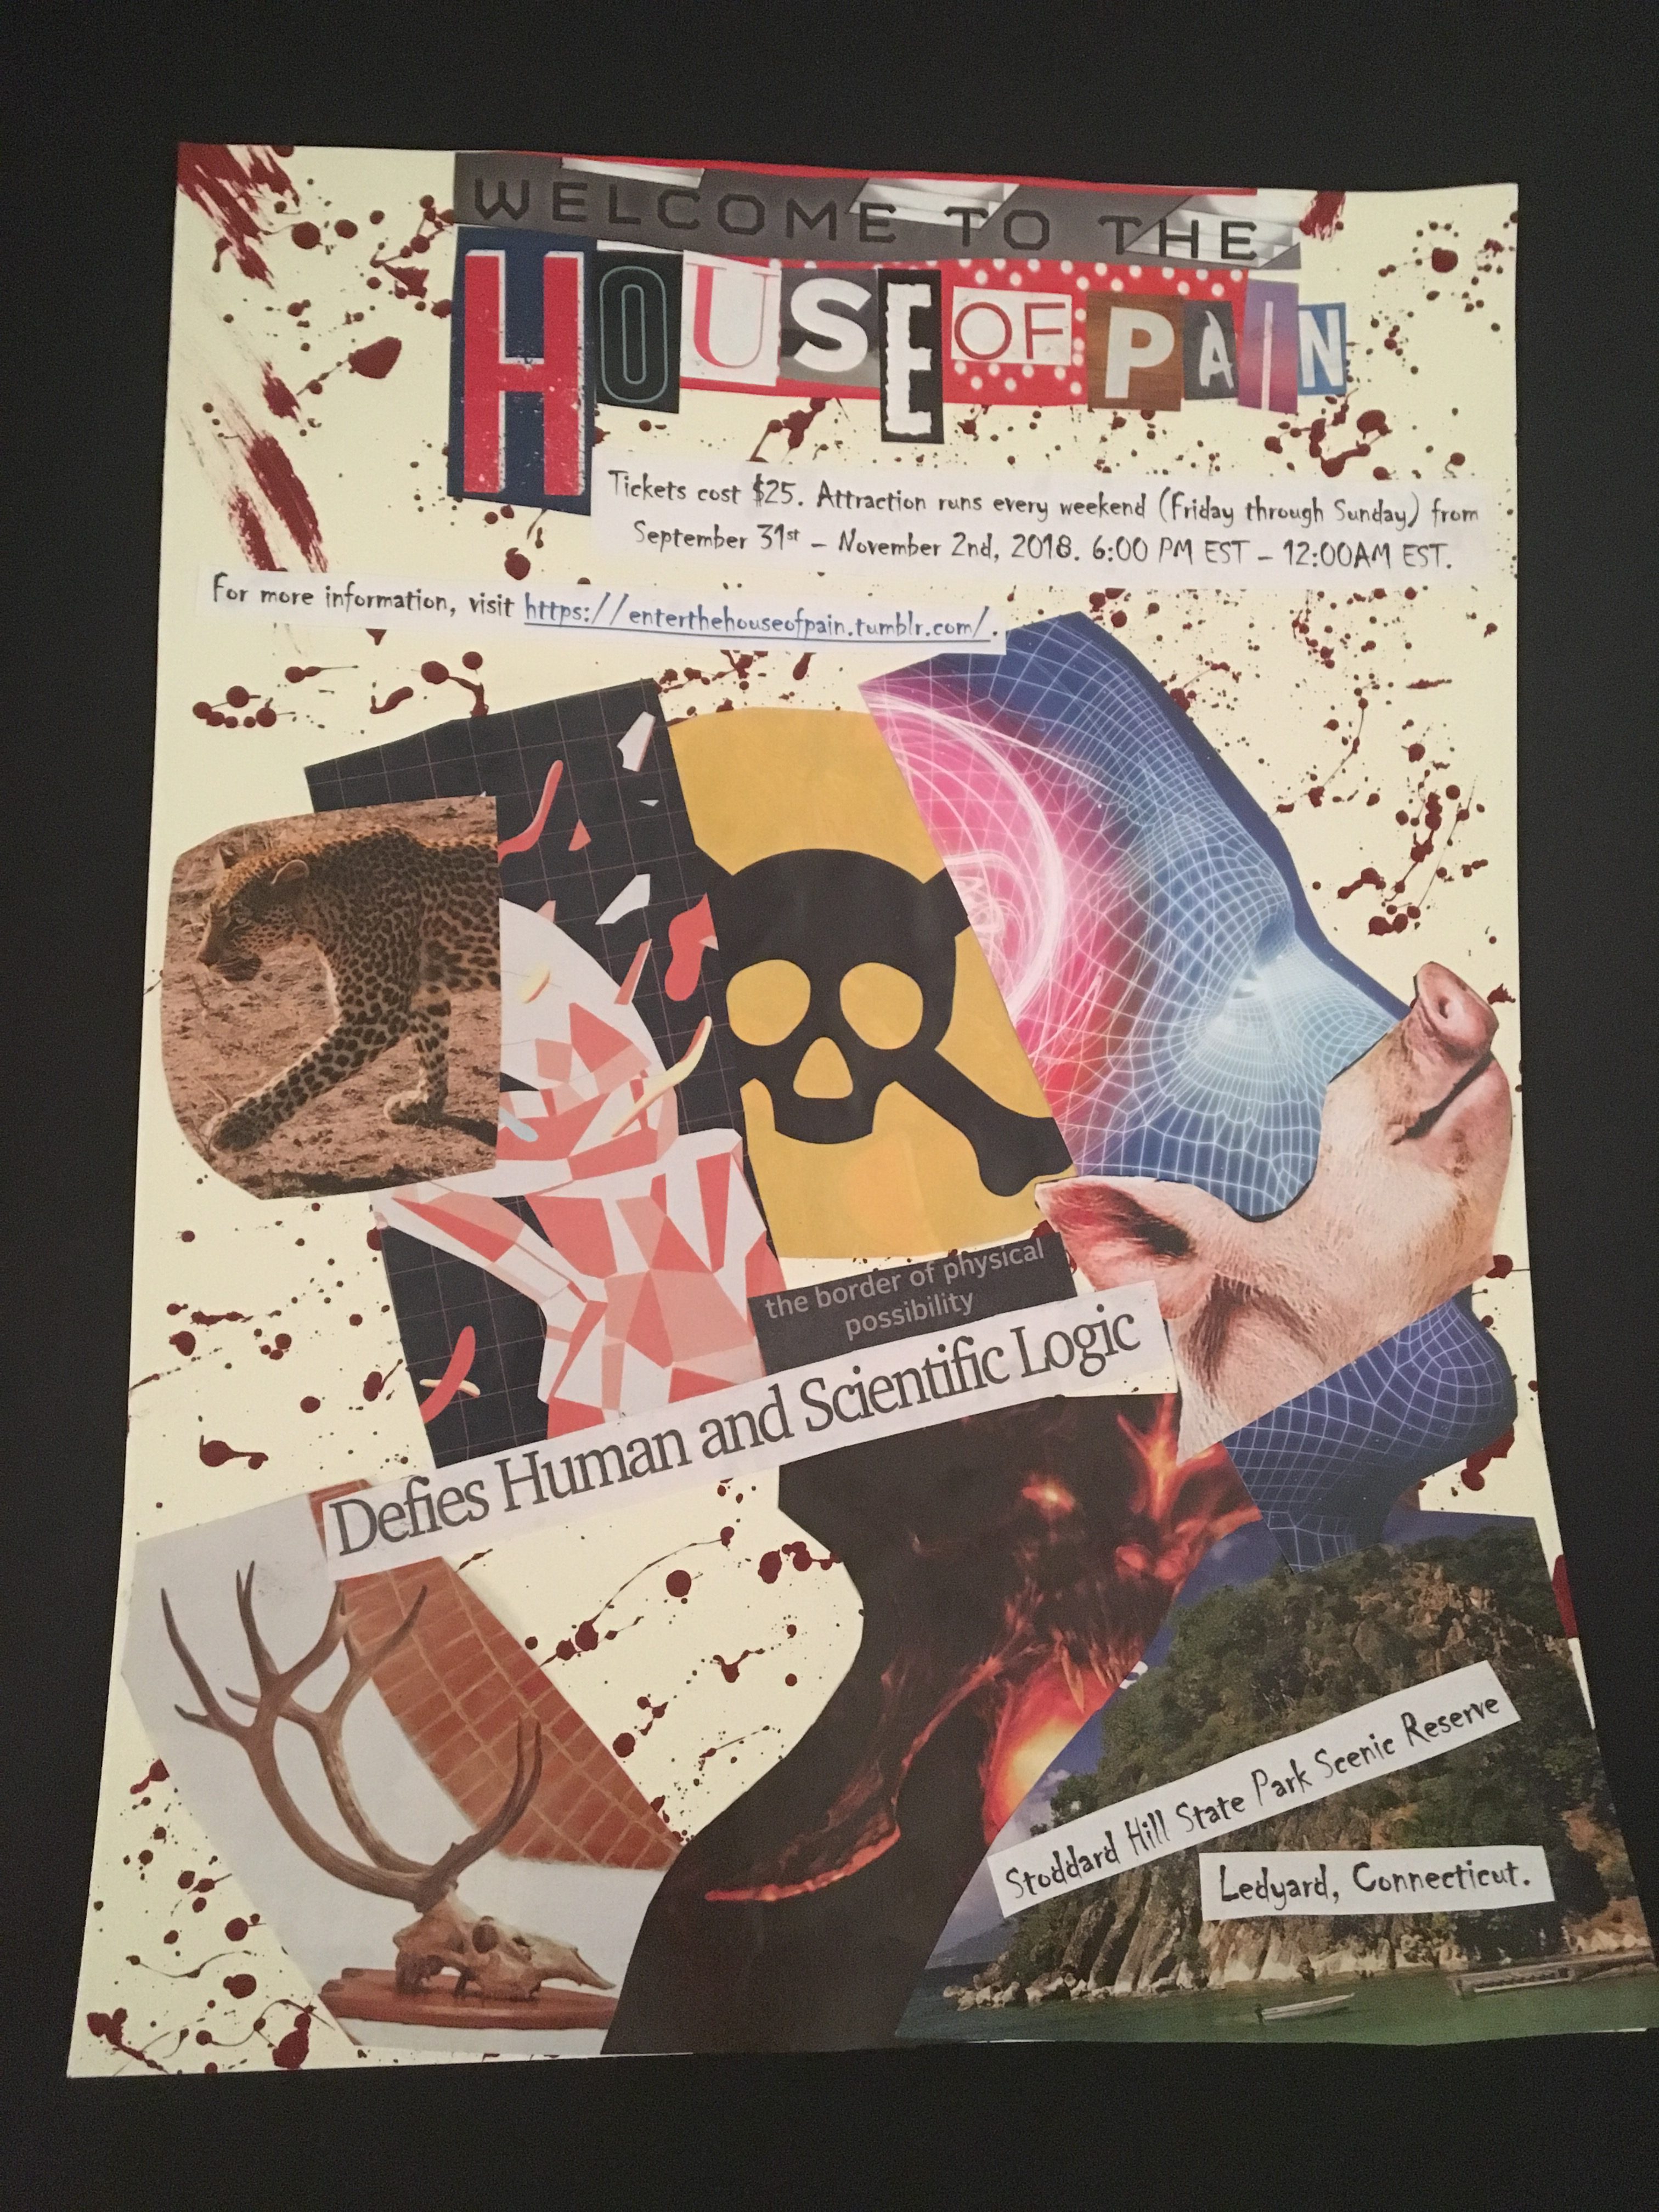 Flyer titled Welcome to the House of Pain, featuring a collage of images